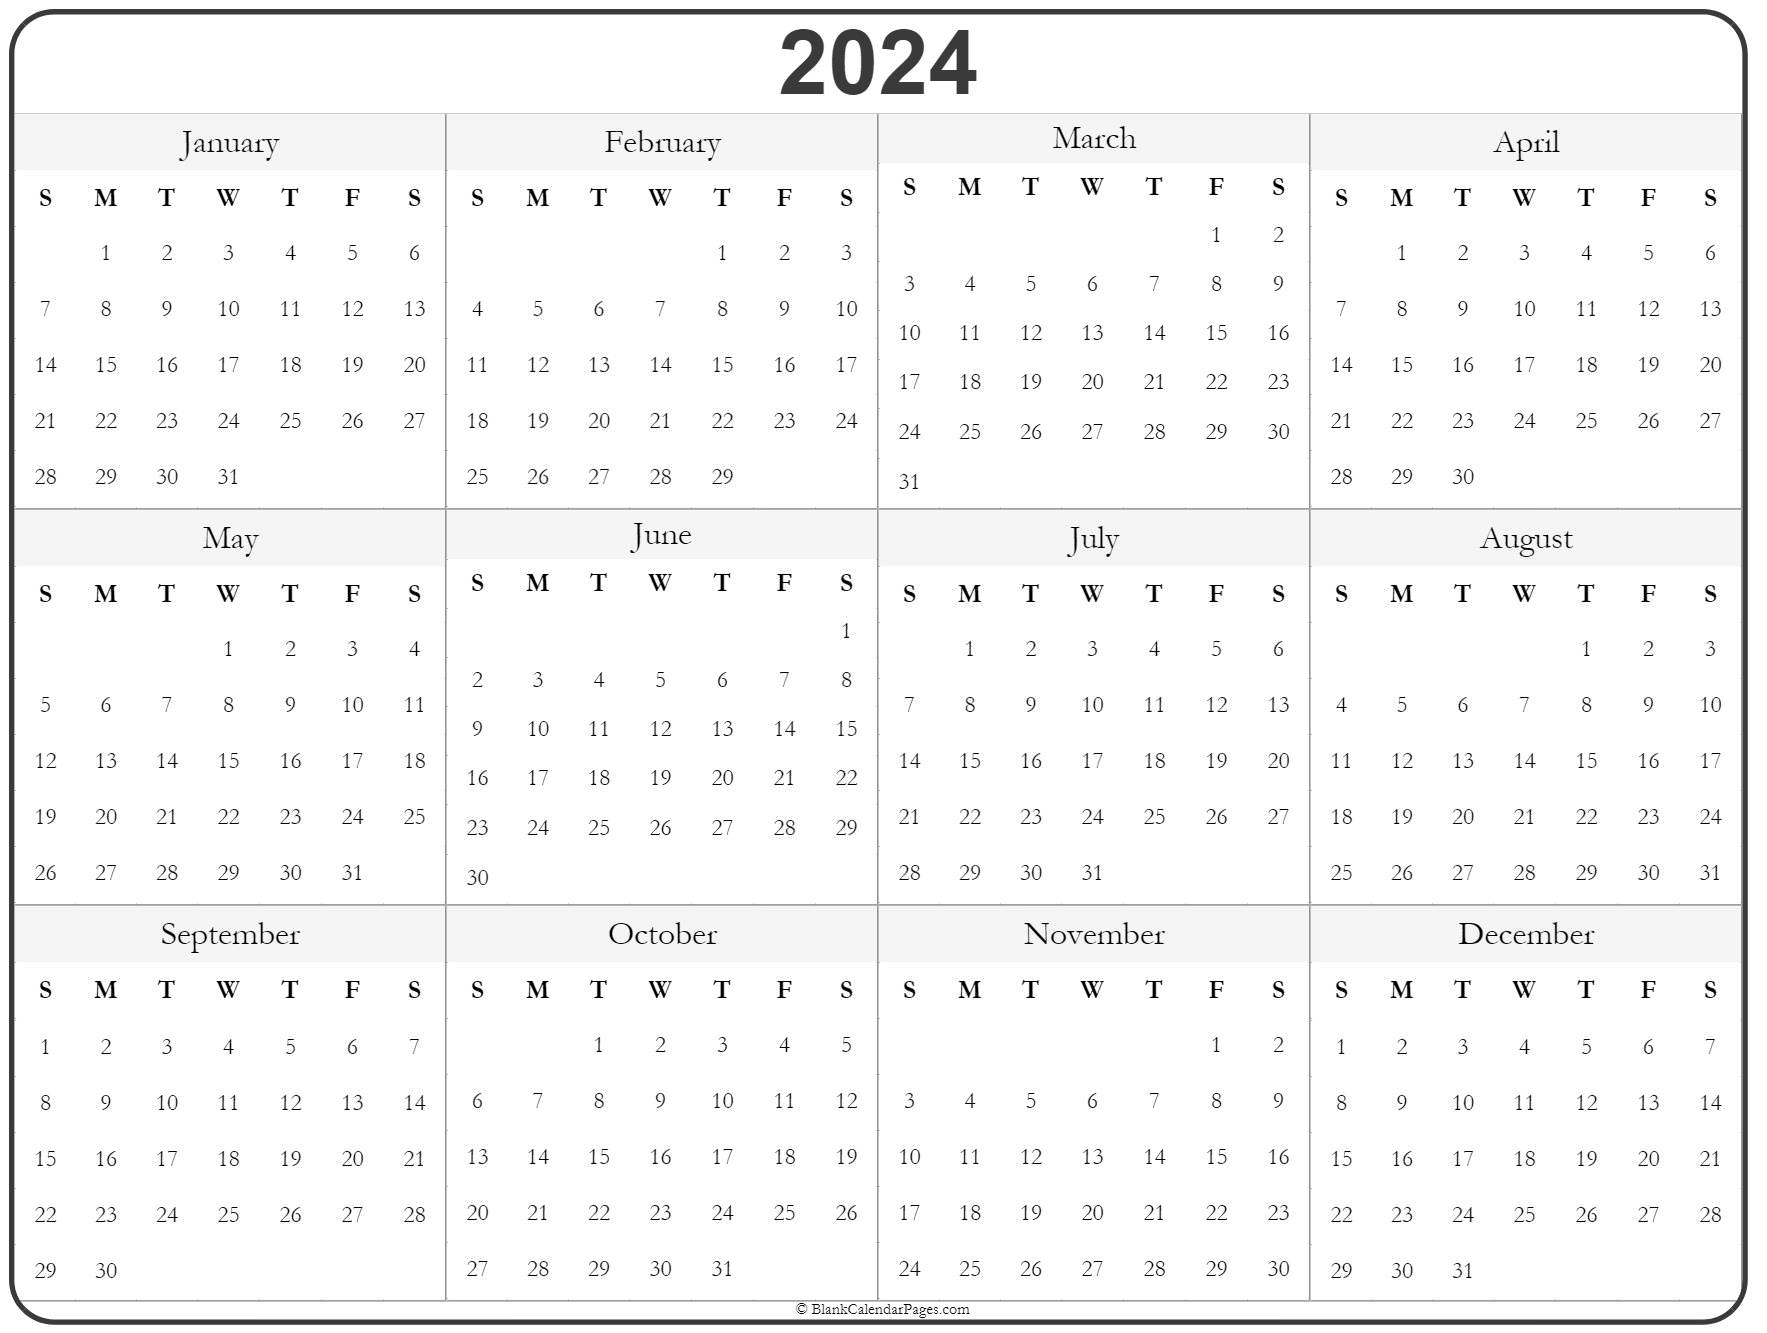 Free 2024 Printable Calendar - Free Printable 2024 Calendar Whole Year One Page